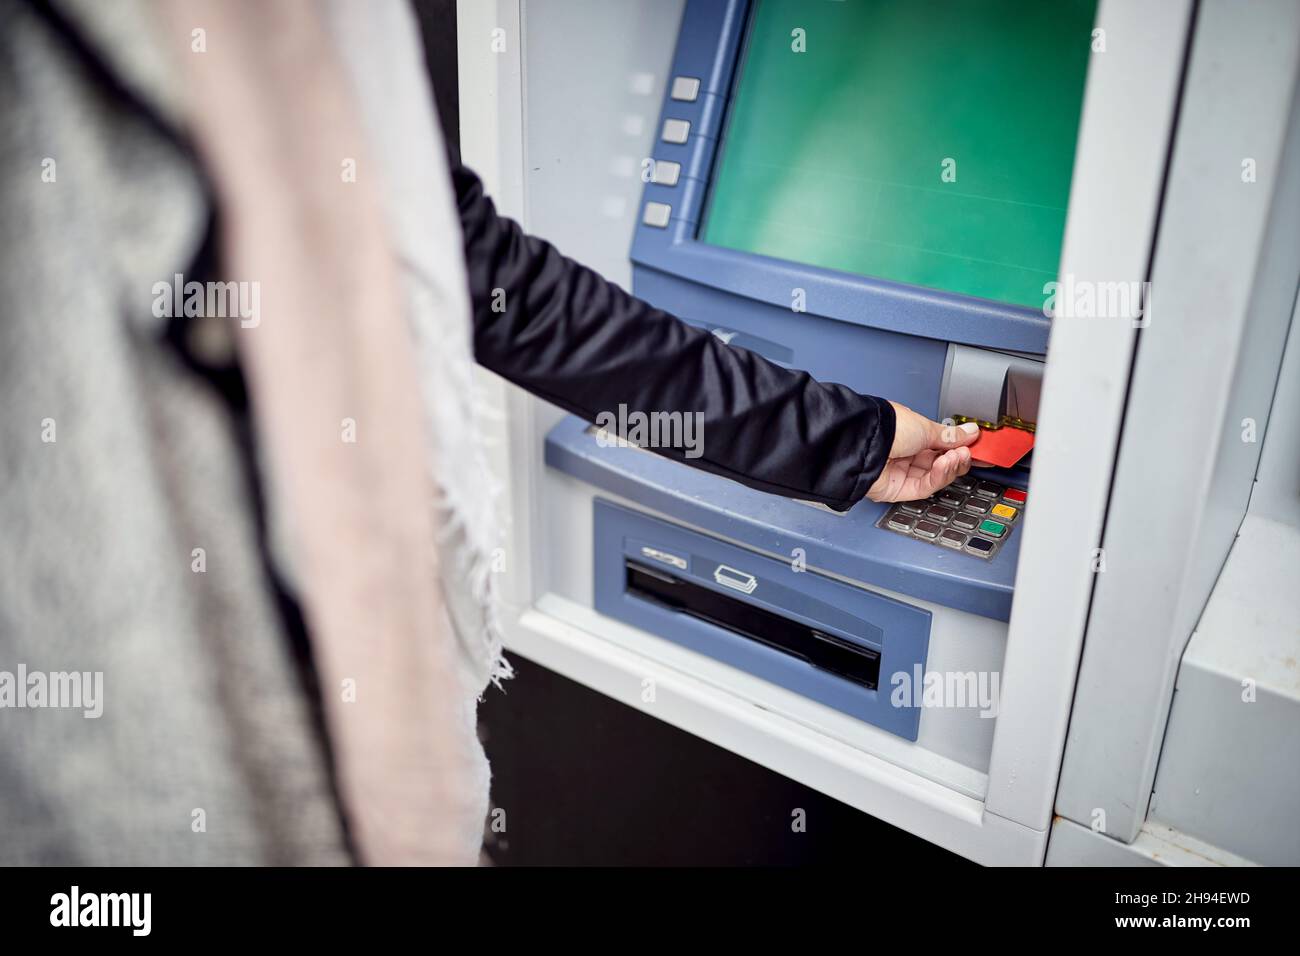 plastic credit card into street atm bank to withdraw money Stock Photo